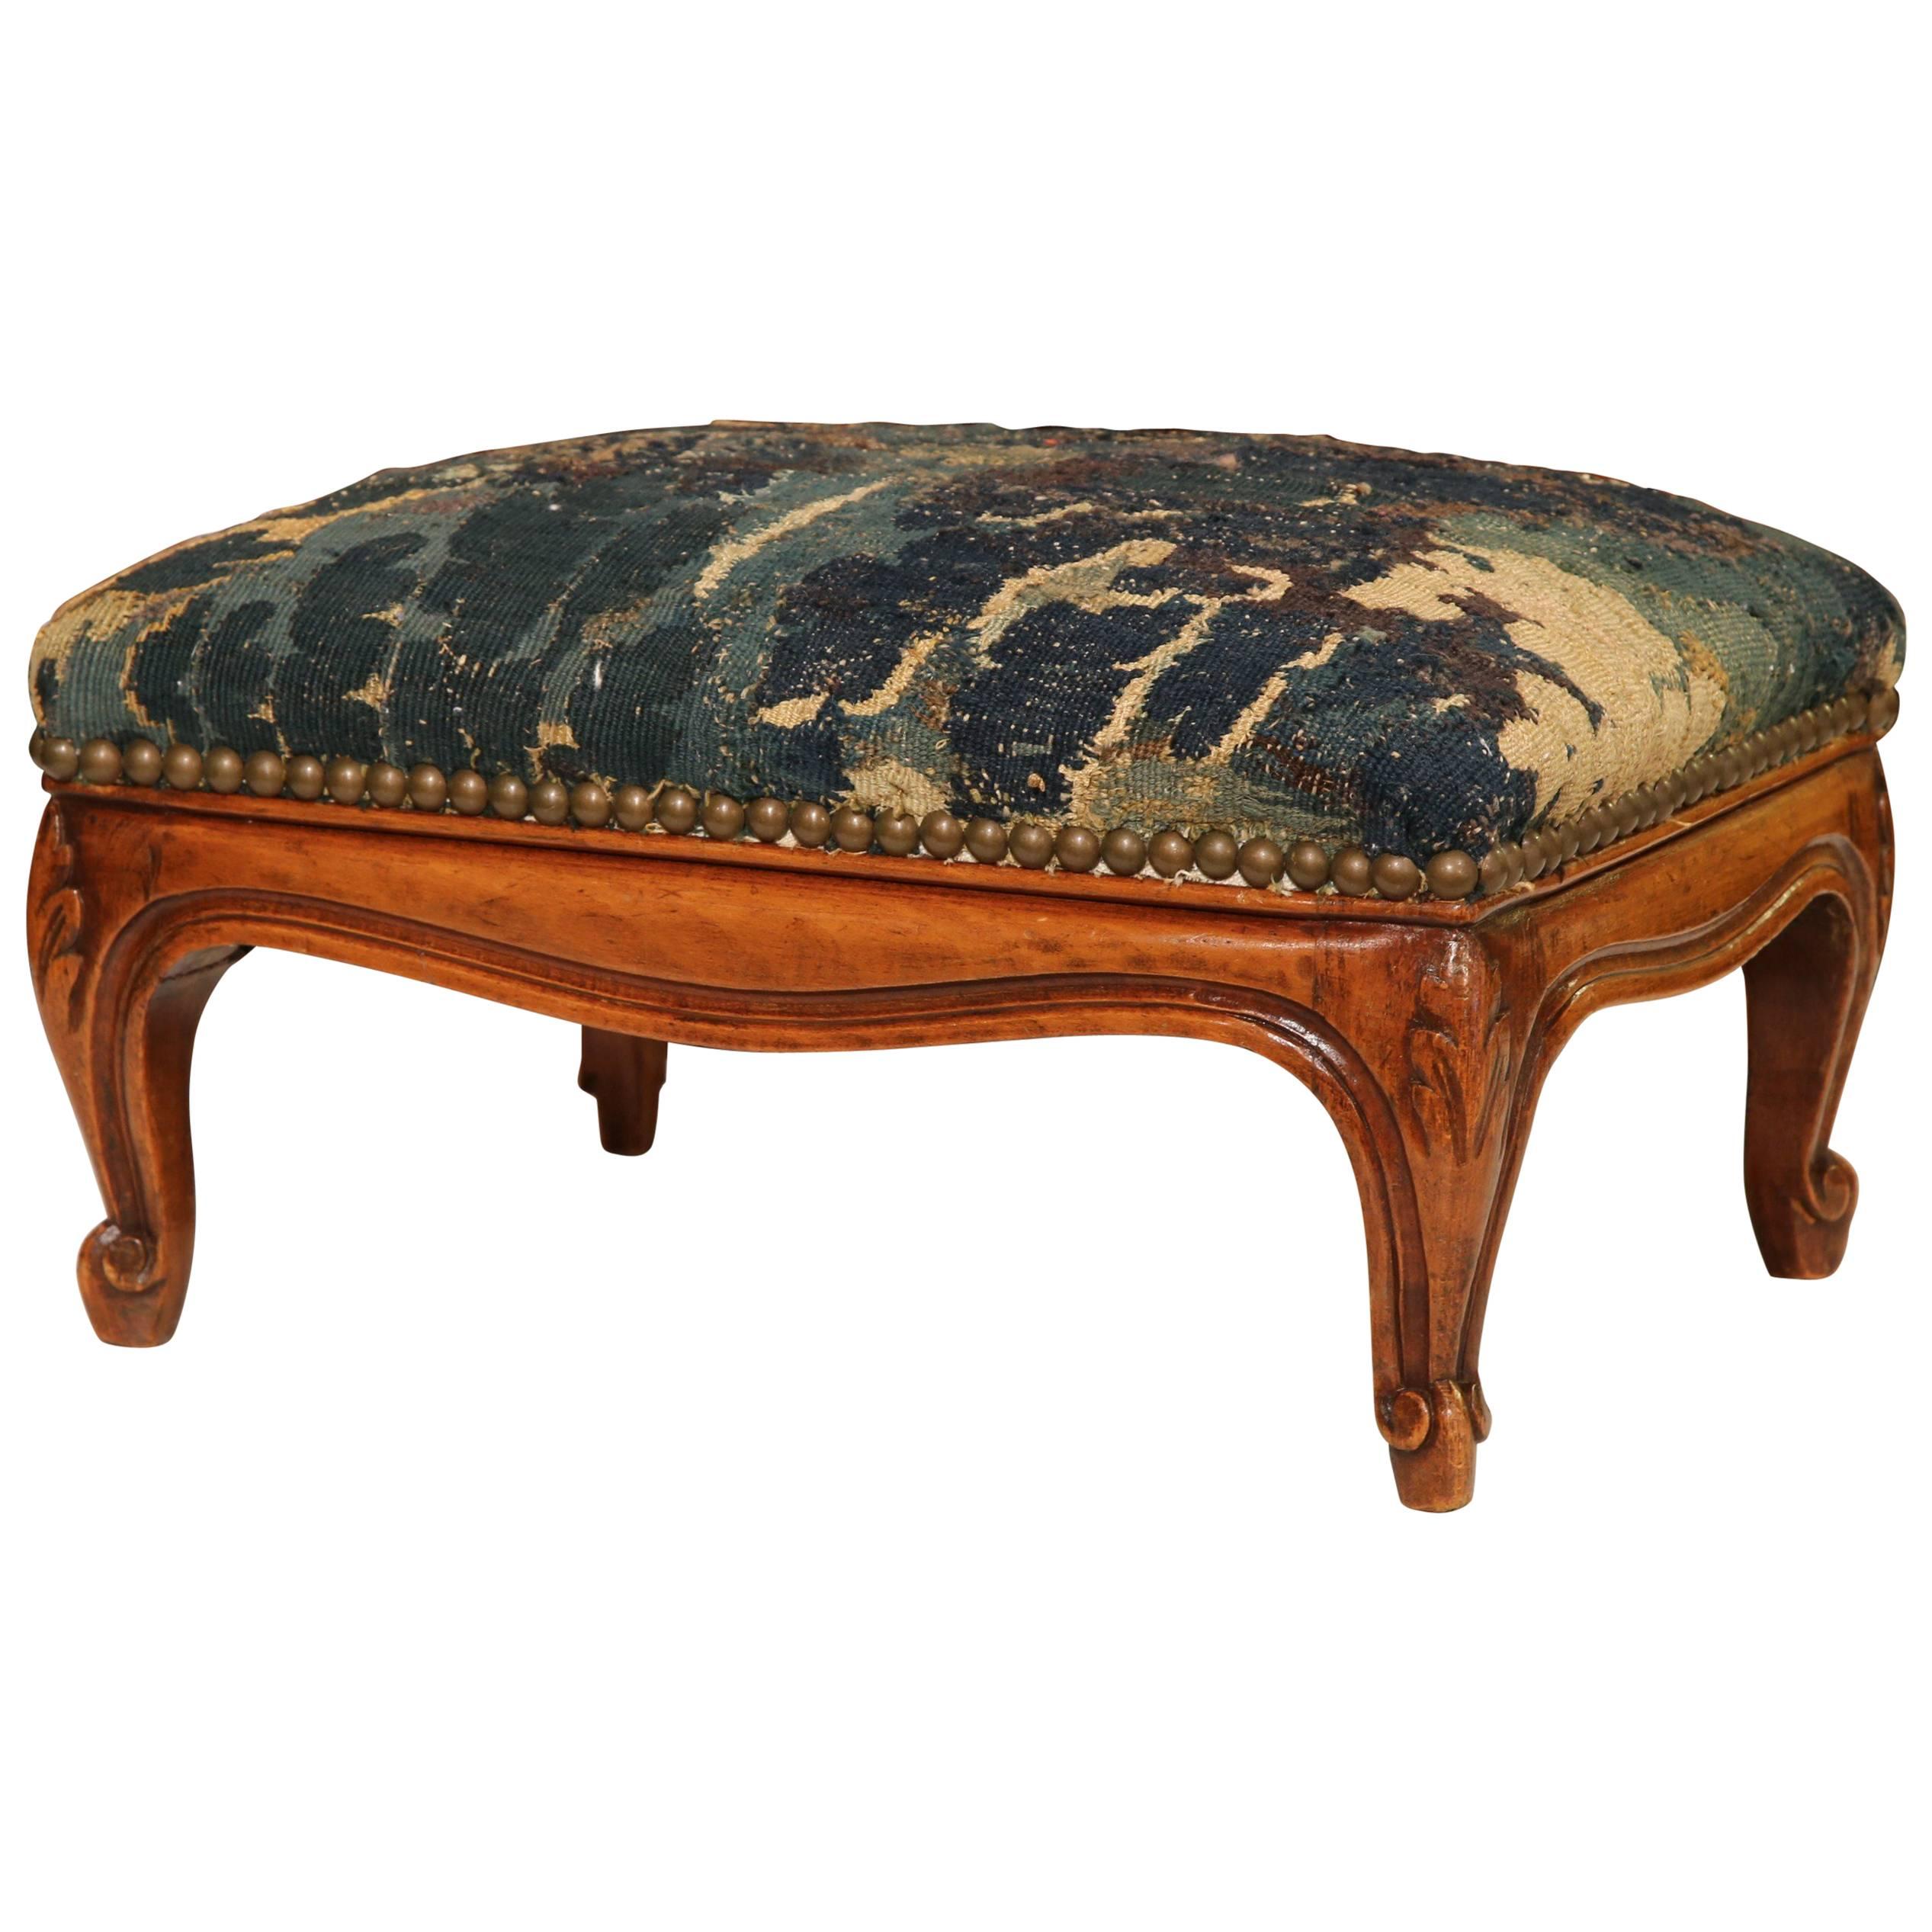 19th Century French Louis XV Carved Walnut Foot Stool with Aubusson Tapestry